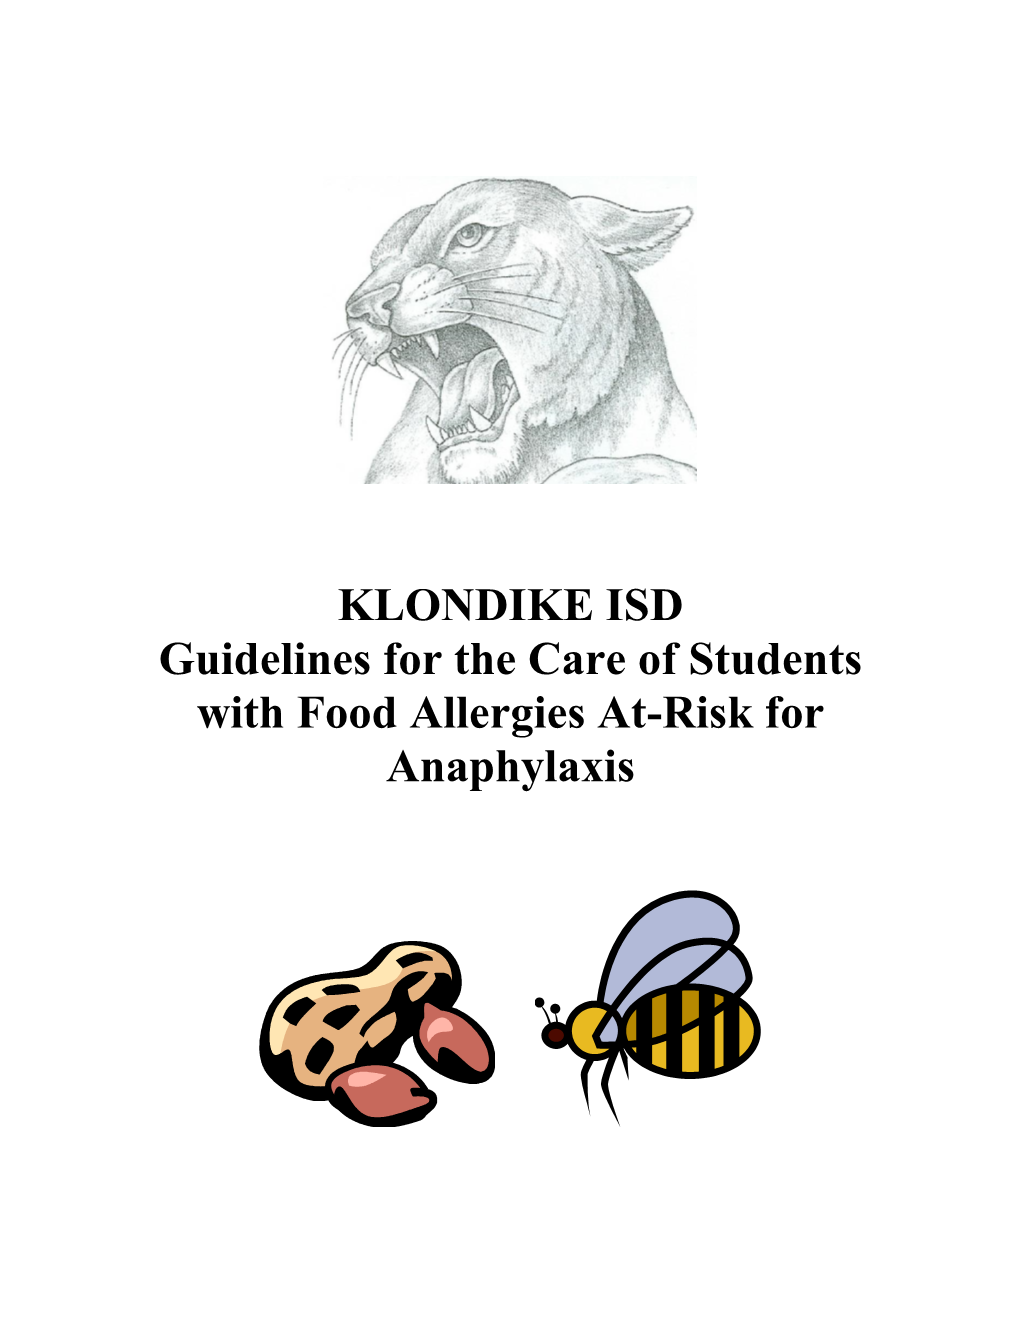 Guidelines for the Care of Students with Food Allergies At-Risk for Anaphylaxis